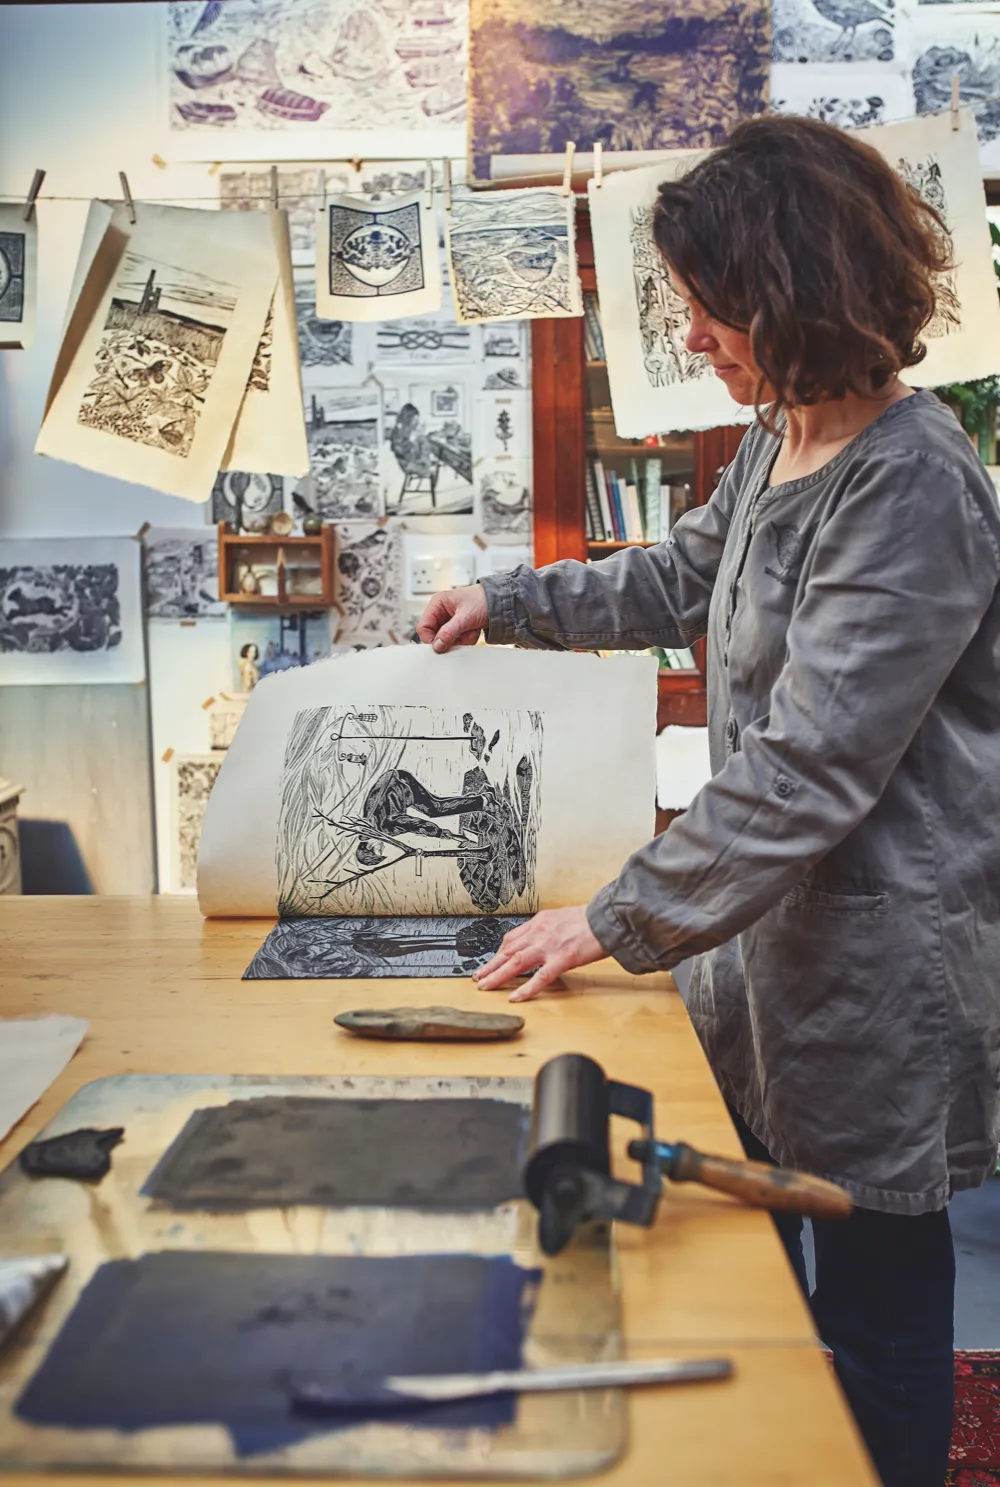 Lou Tonkin peels away paper from the Lino block to show a finished print